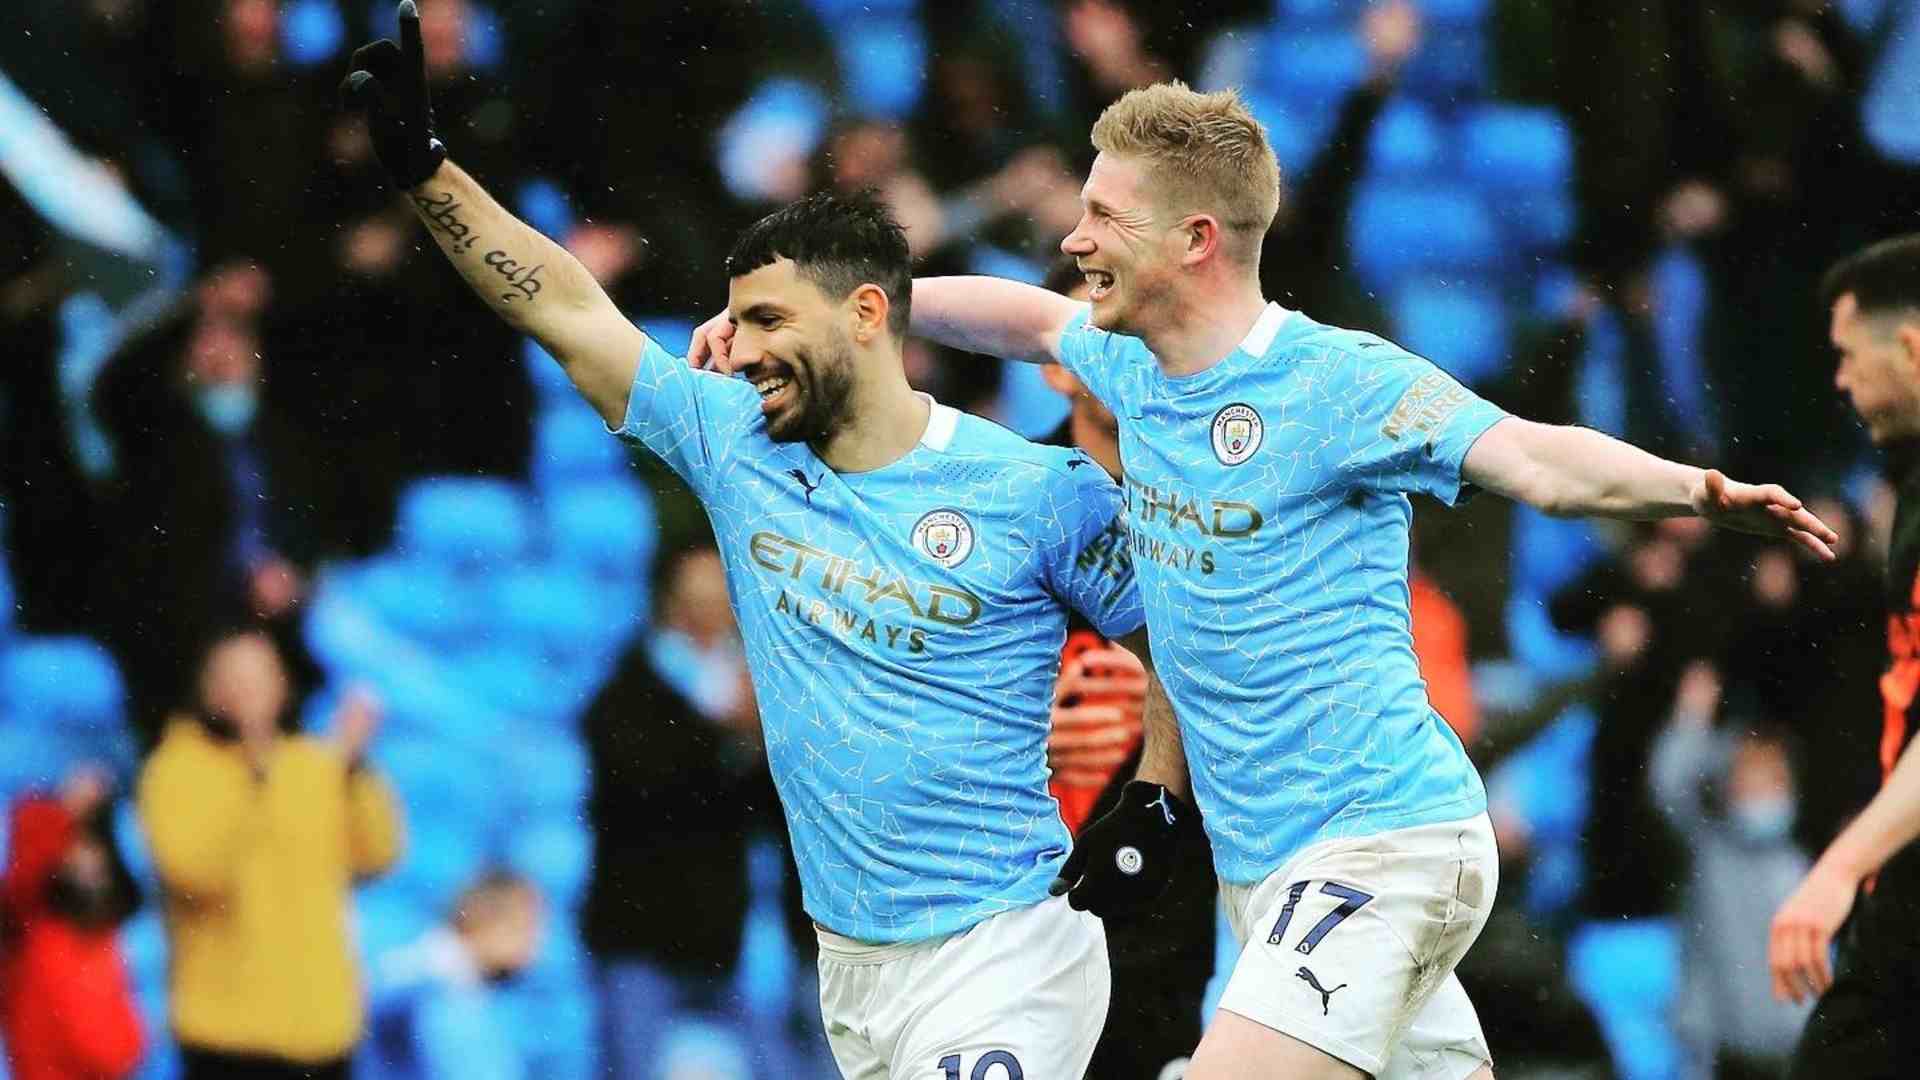 Sergio Aguero and Kevin de Bruyne are two of the greatest overseas recruits in the Premier League. (Image Credit: Twitter/@DeBruyneKev)